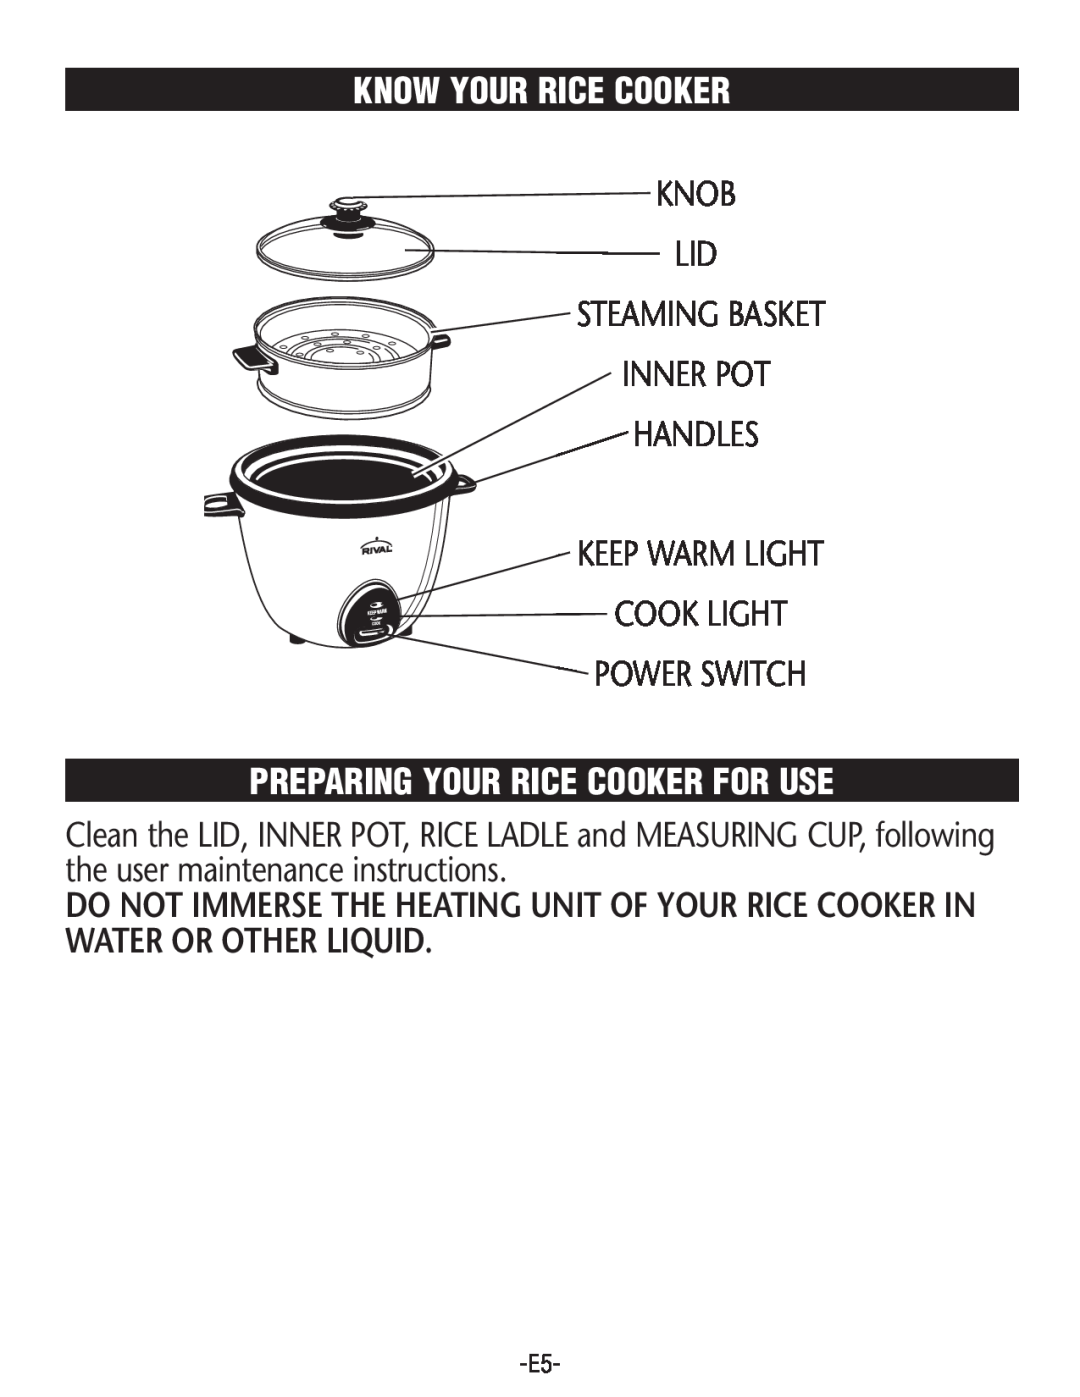 Rival RC101, RC100 Know Your Rice Cooker, Preparing Your Rice Cooker For Use, Knob Lid Steaming Basket Inner Pot Handles 